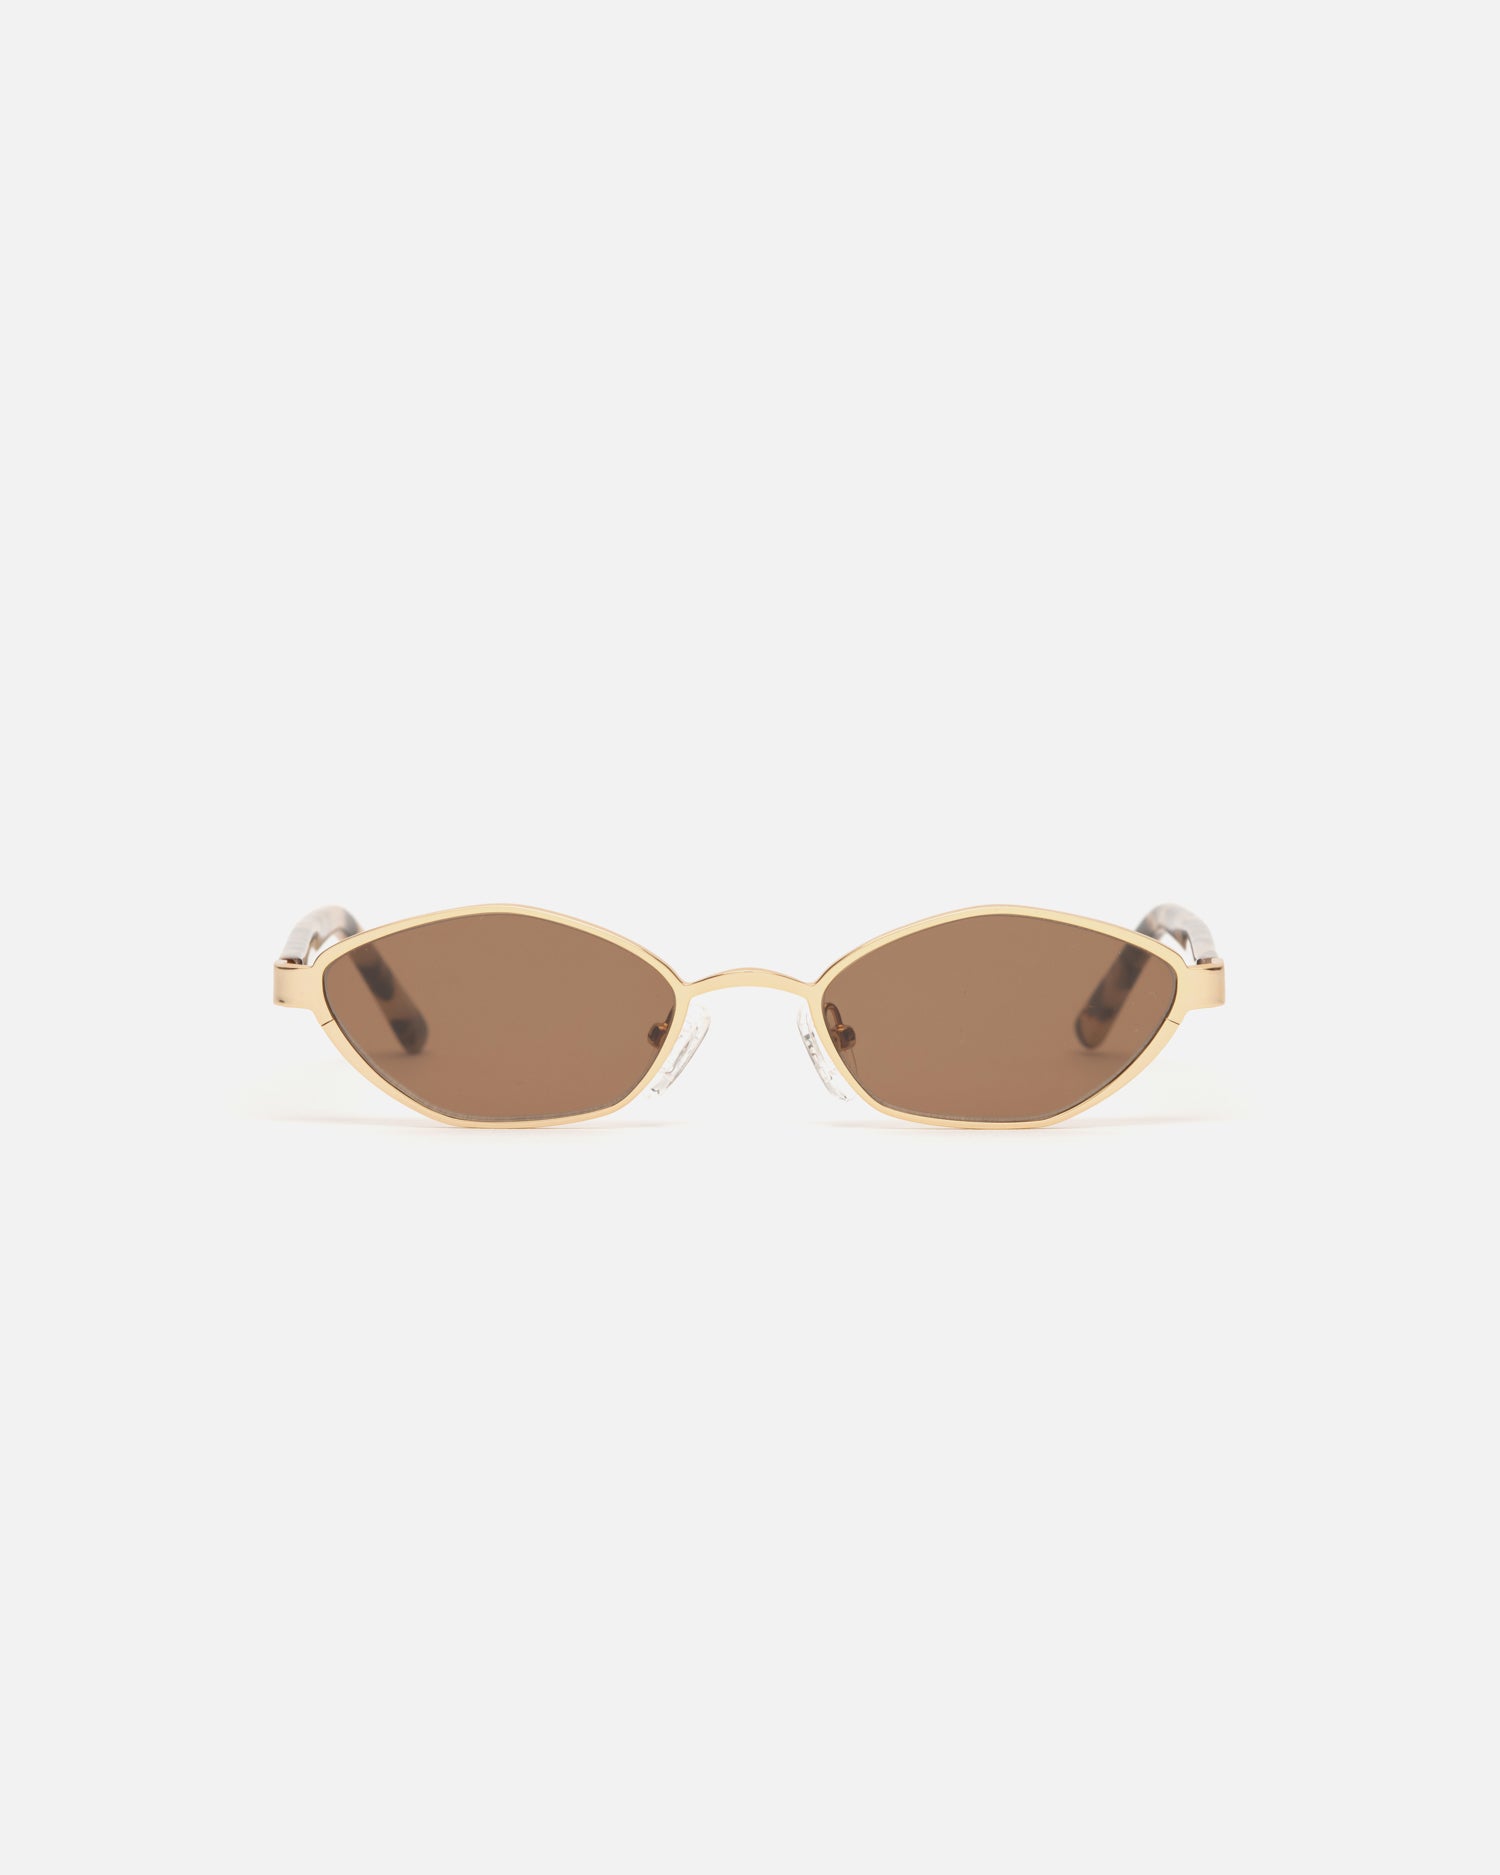 Lu Goldie Farrah Gold Wire Frame Round Sunglasses in Choc Tort brown, front image